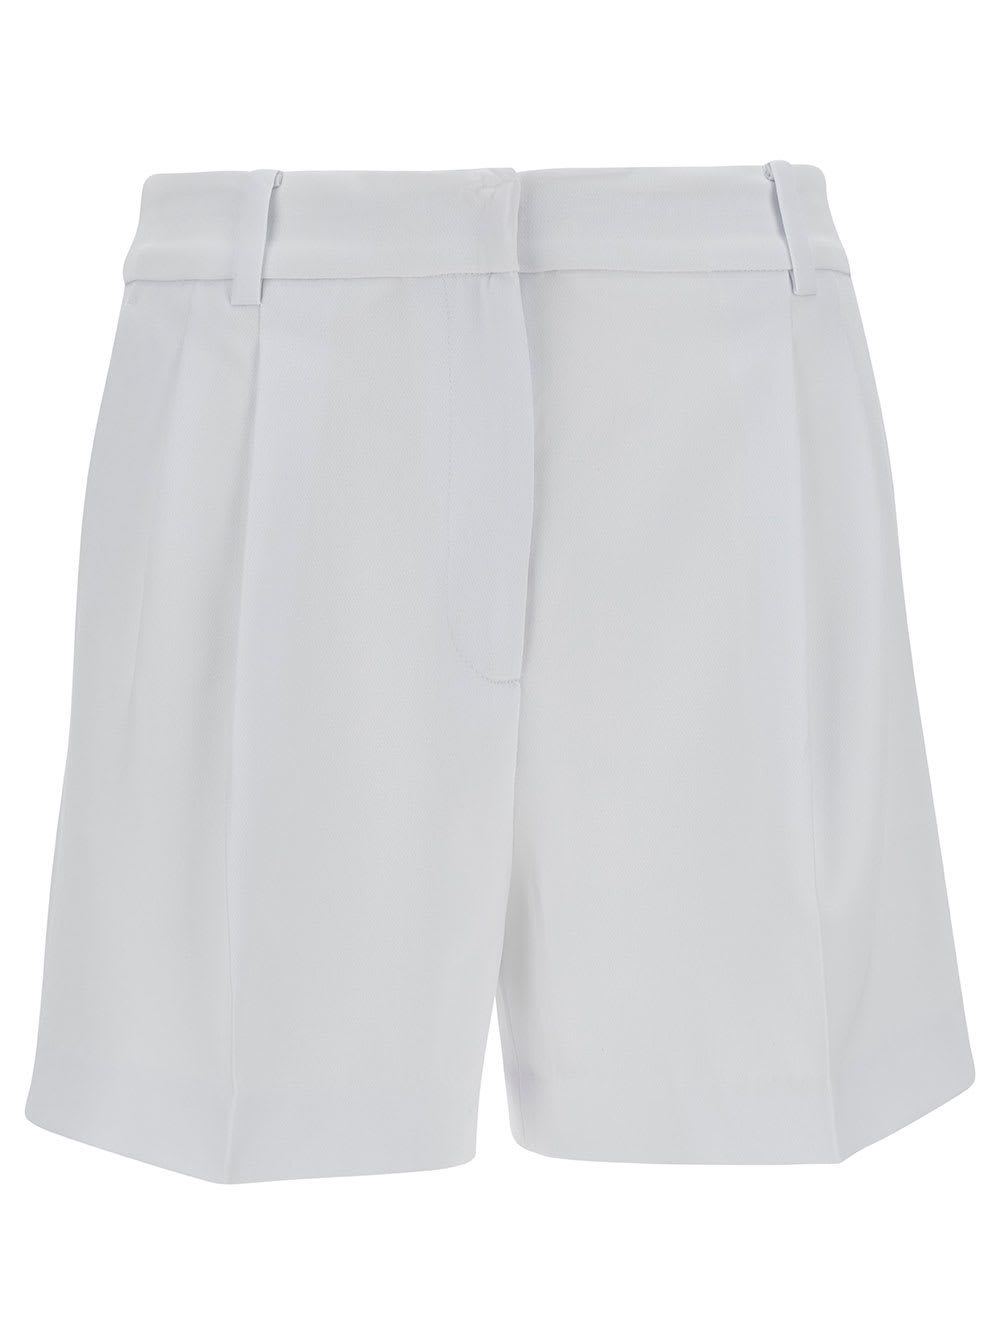 Michael Kors Concealed Shorts In White